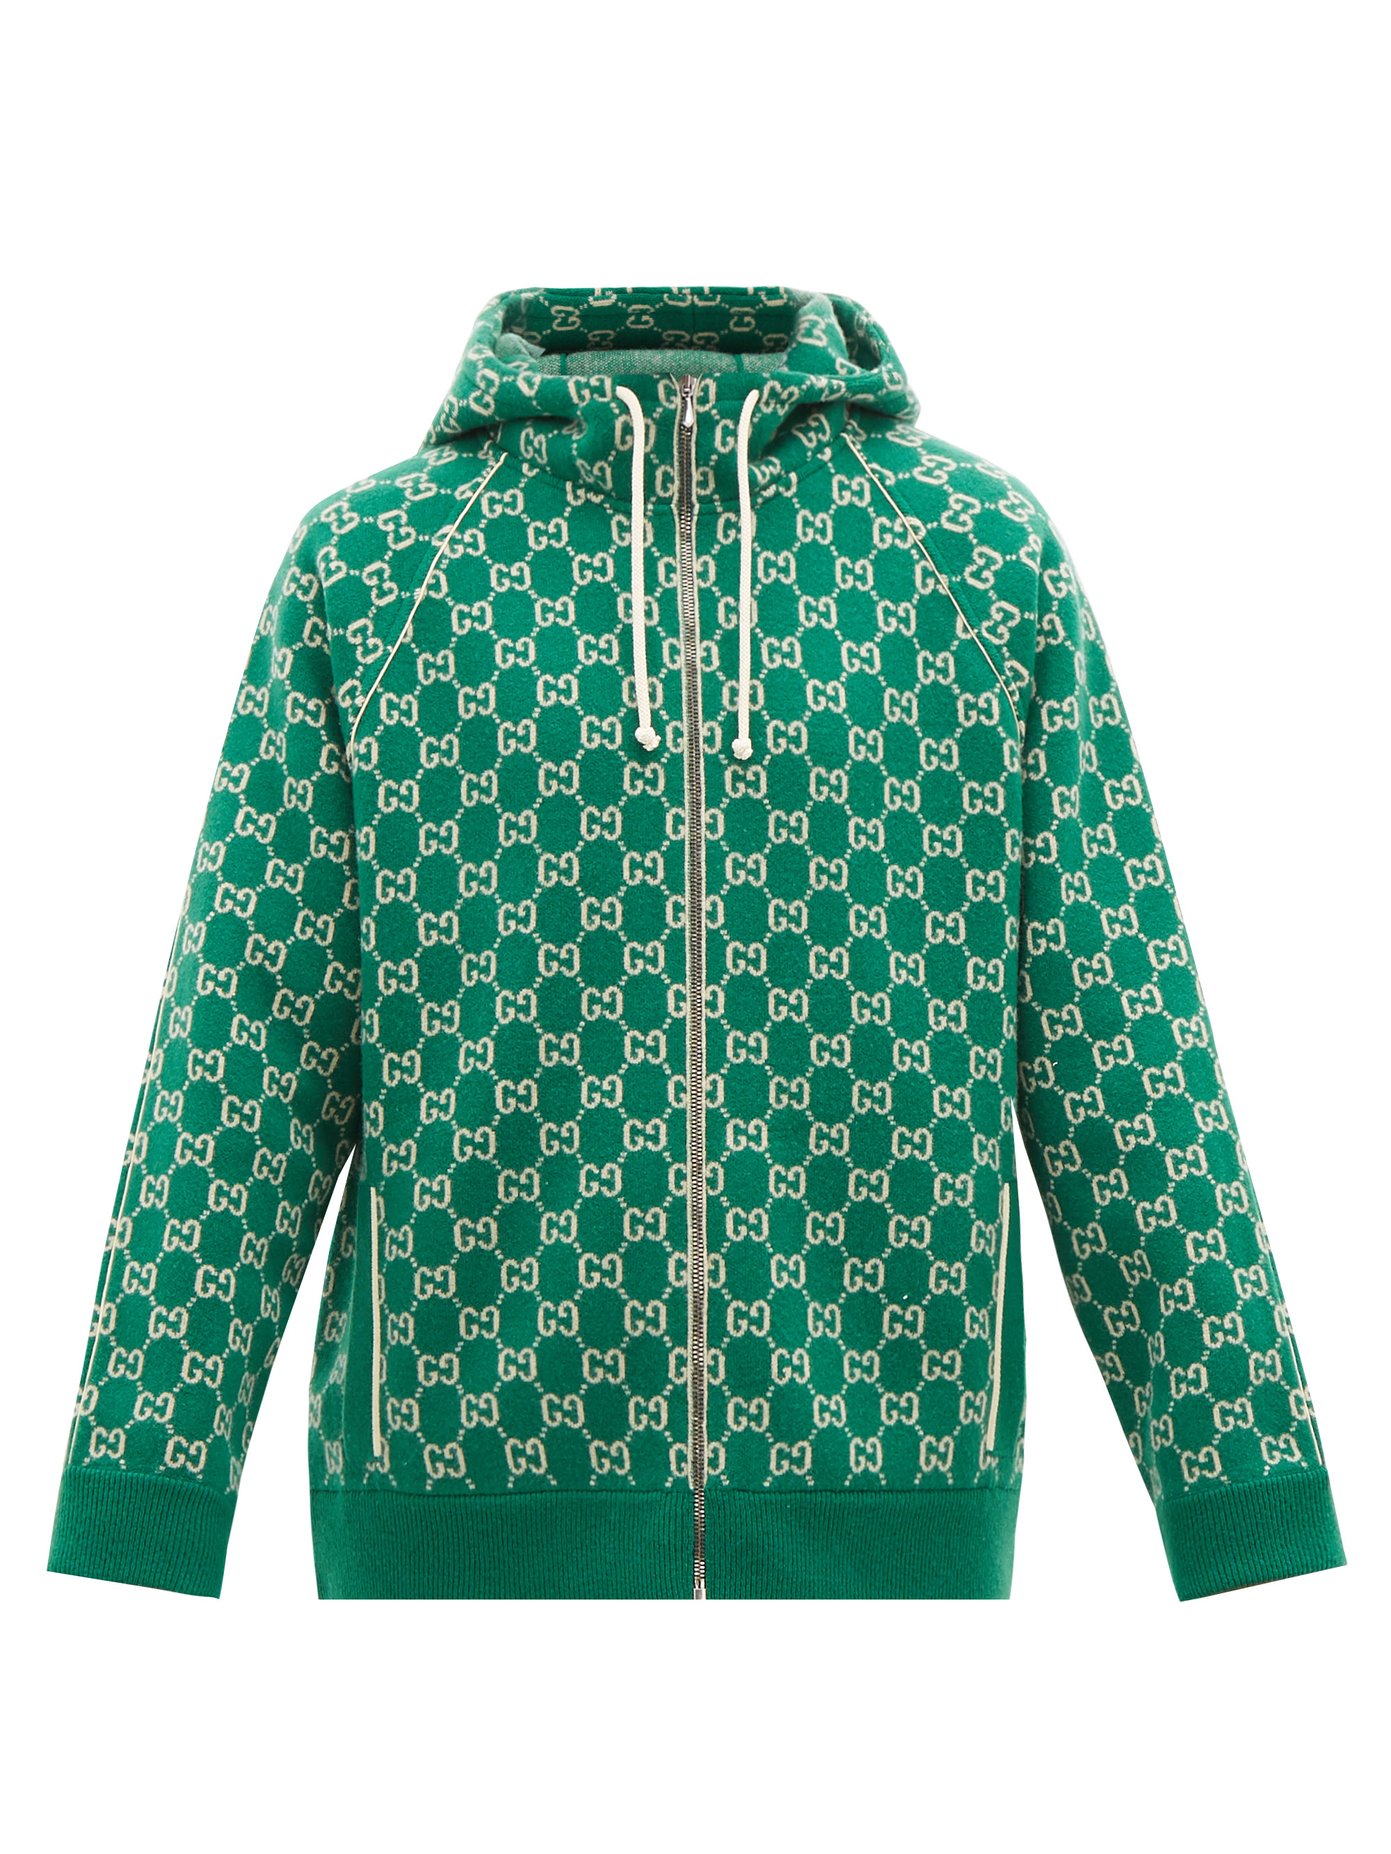 green hooded sweater